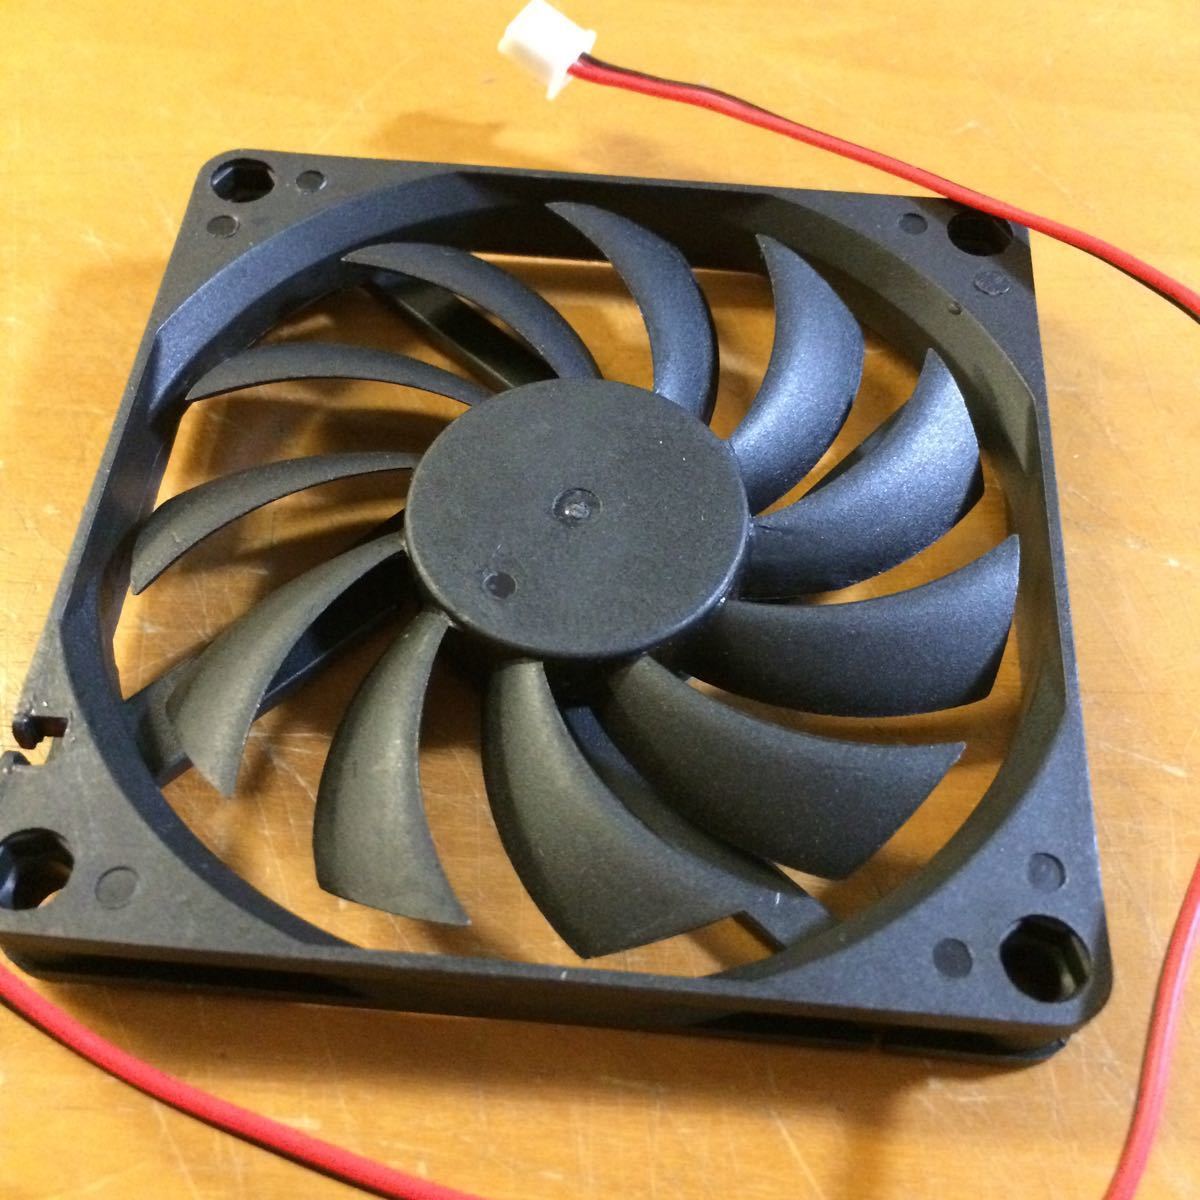  free shipping! DC 12V fan 8cm ( warmth 1cm) brushless motor quiet sound type all sorts cooling .! cooling fan FAN